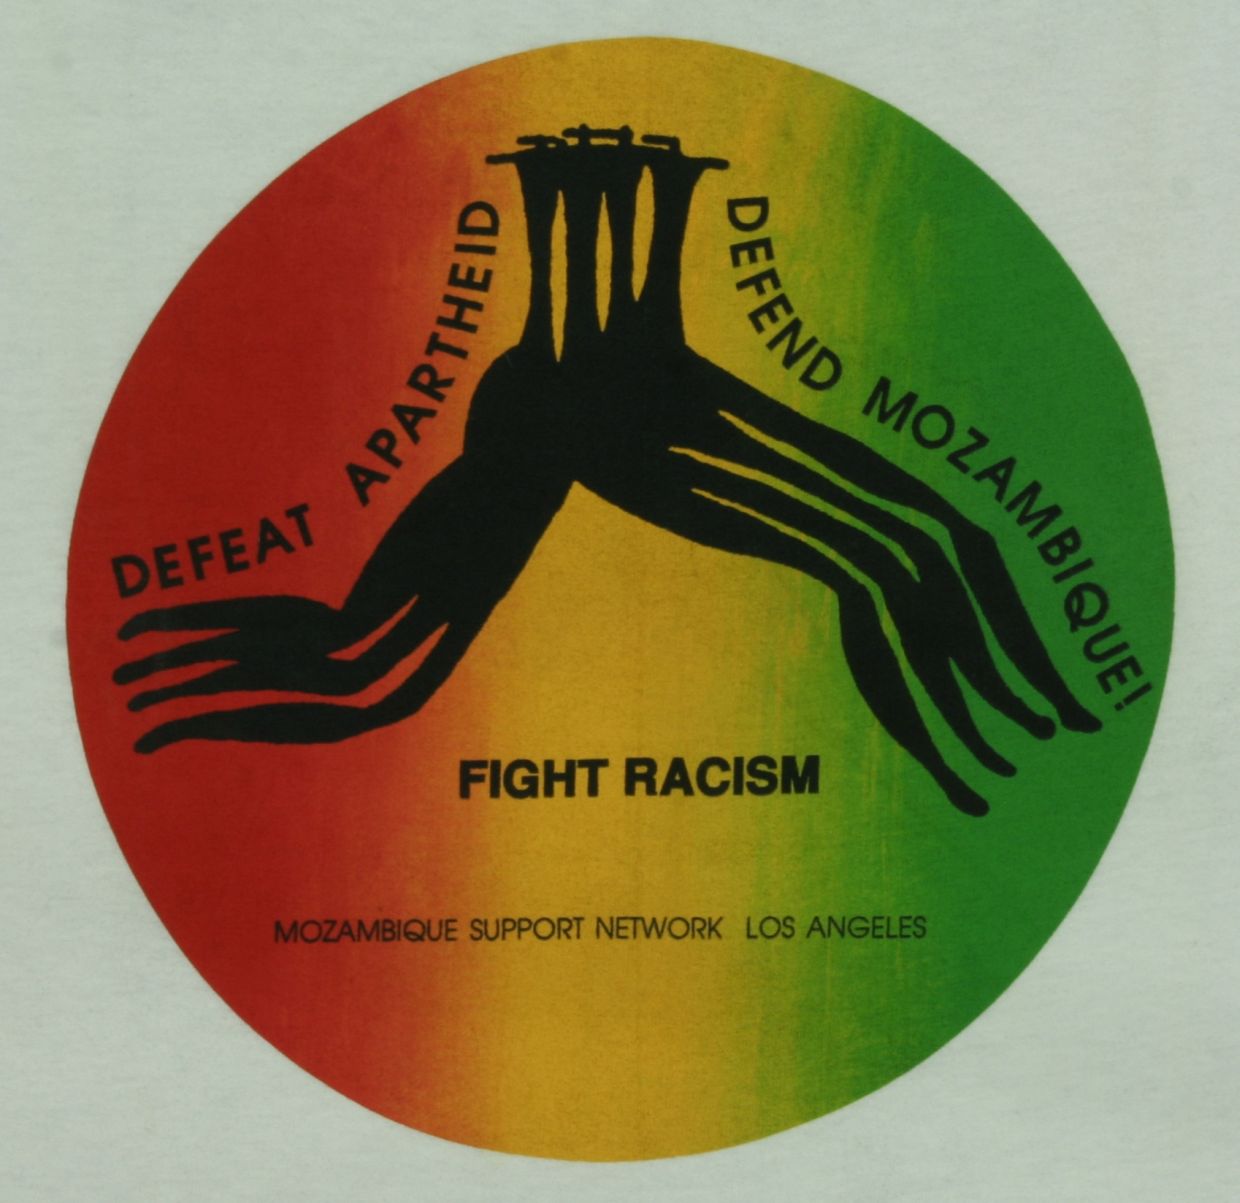 The T-shirt design, by Rachel Chapman, shows four black, abstract figures leaping together across a circle with a horizontal pattern of red, yellow, and green. The T-shirt was also produced with a white design on black. The &ldquo;Baobab News&rdquo; December 1992 / January 1993 issue (available on this website) announced that the shirt was available for sale.